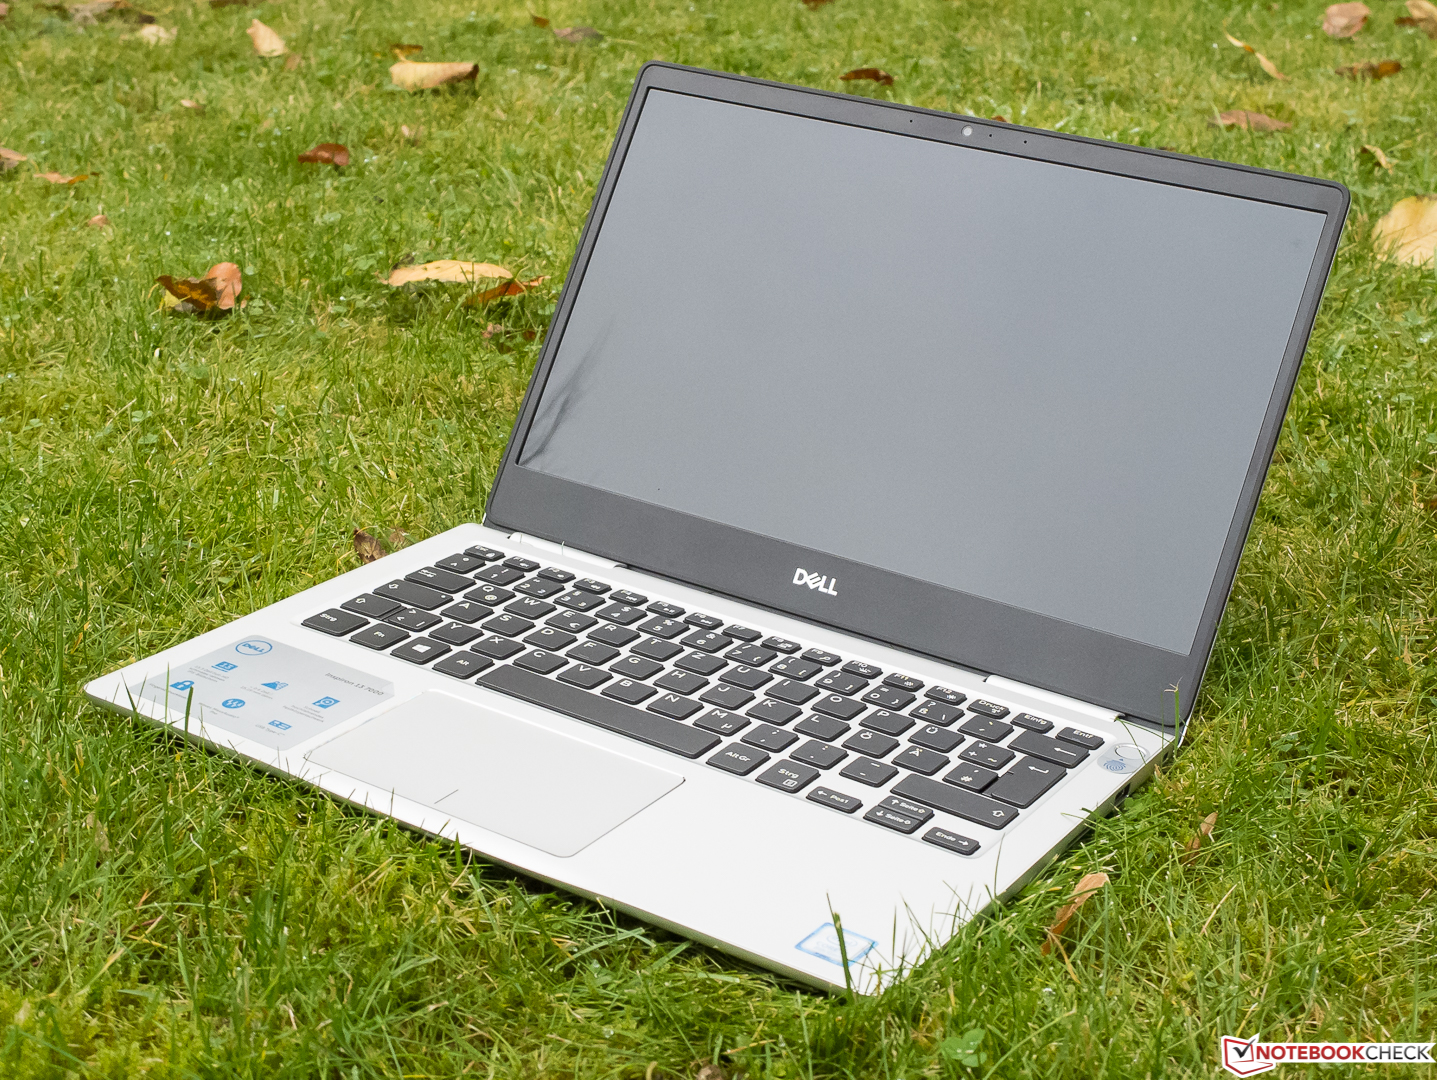 Dell Inspiron 7370 Laptop Review: Out of Date, But Still Holds Up